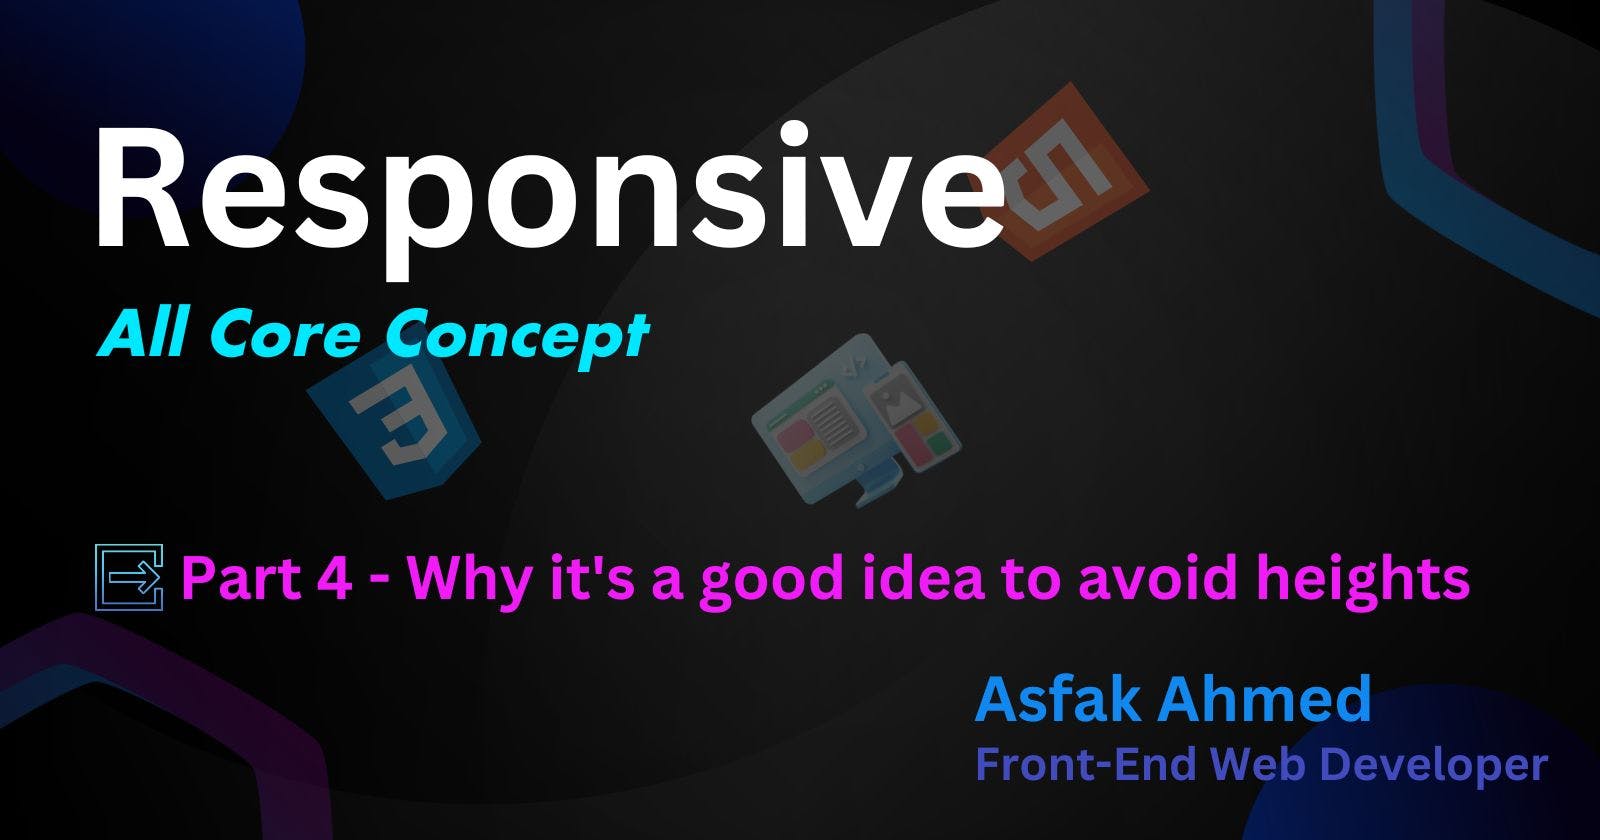 Responsive ( all core concept ) Part 4 - Why it's a good idea to avoid heights